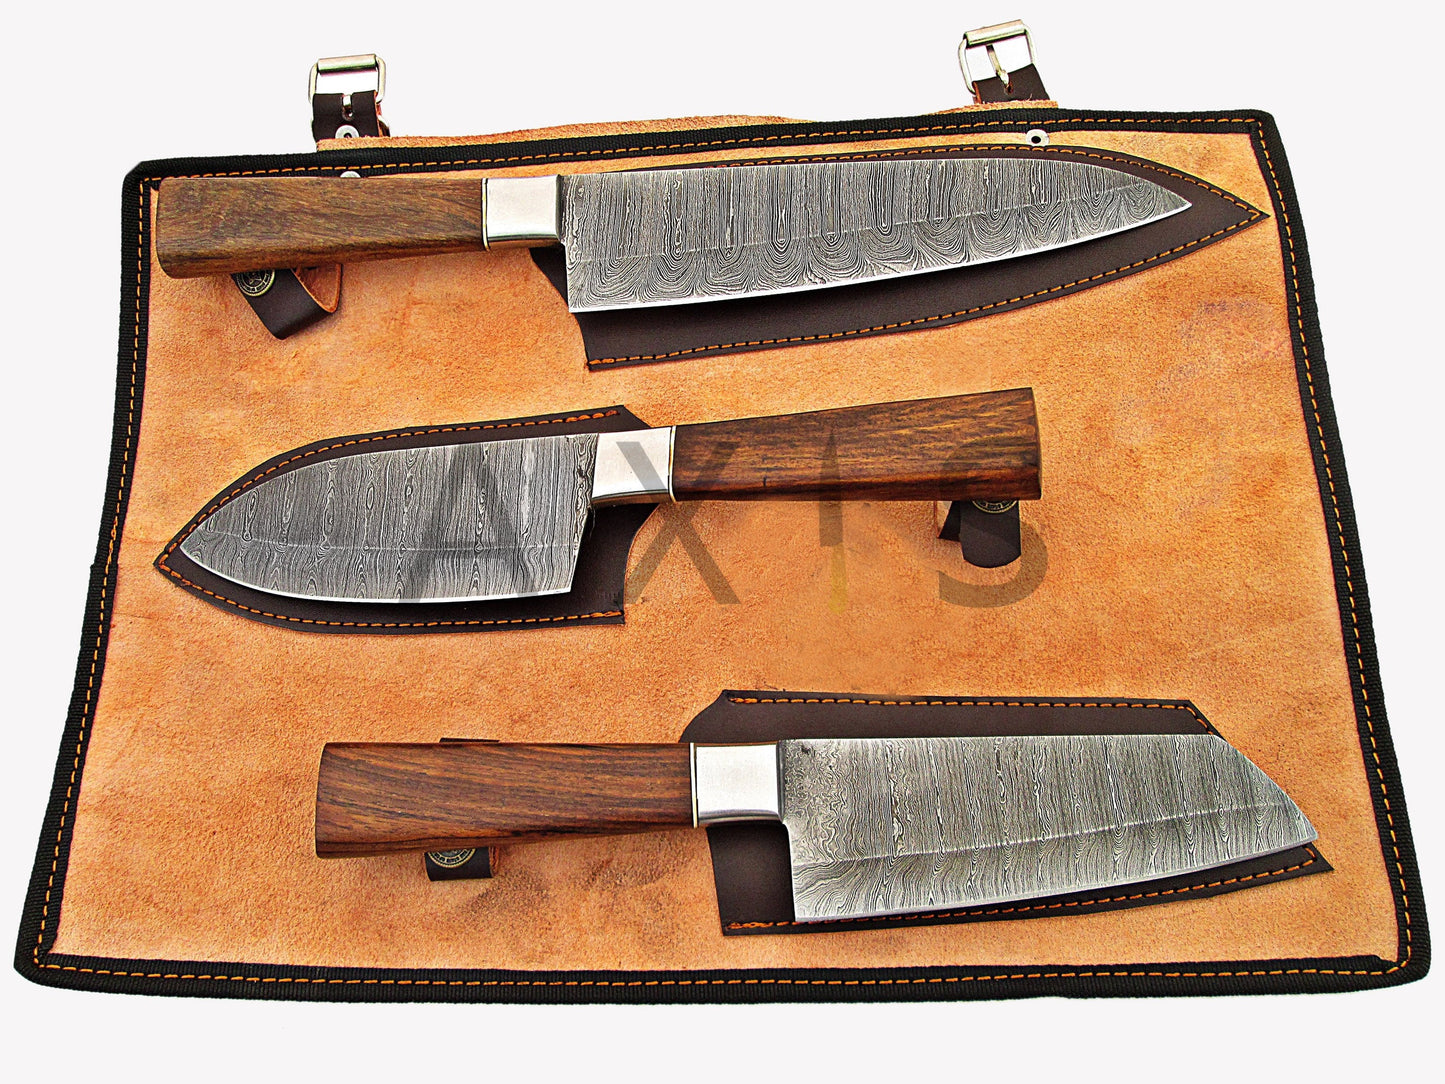 Handforged Chef Knife Set, Damascus Steel Knives, Chef Knive